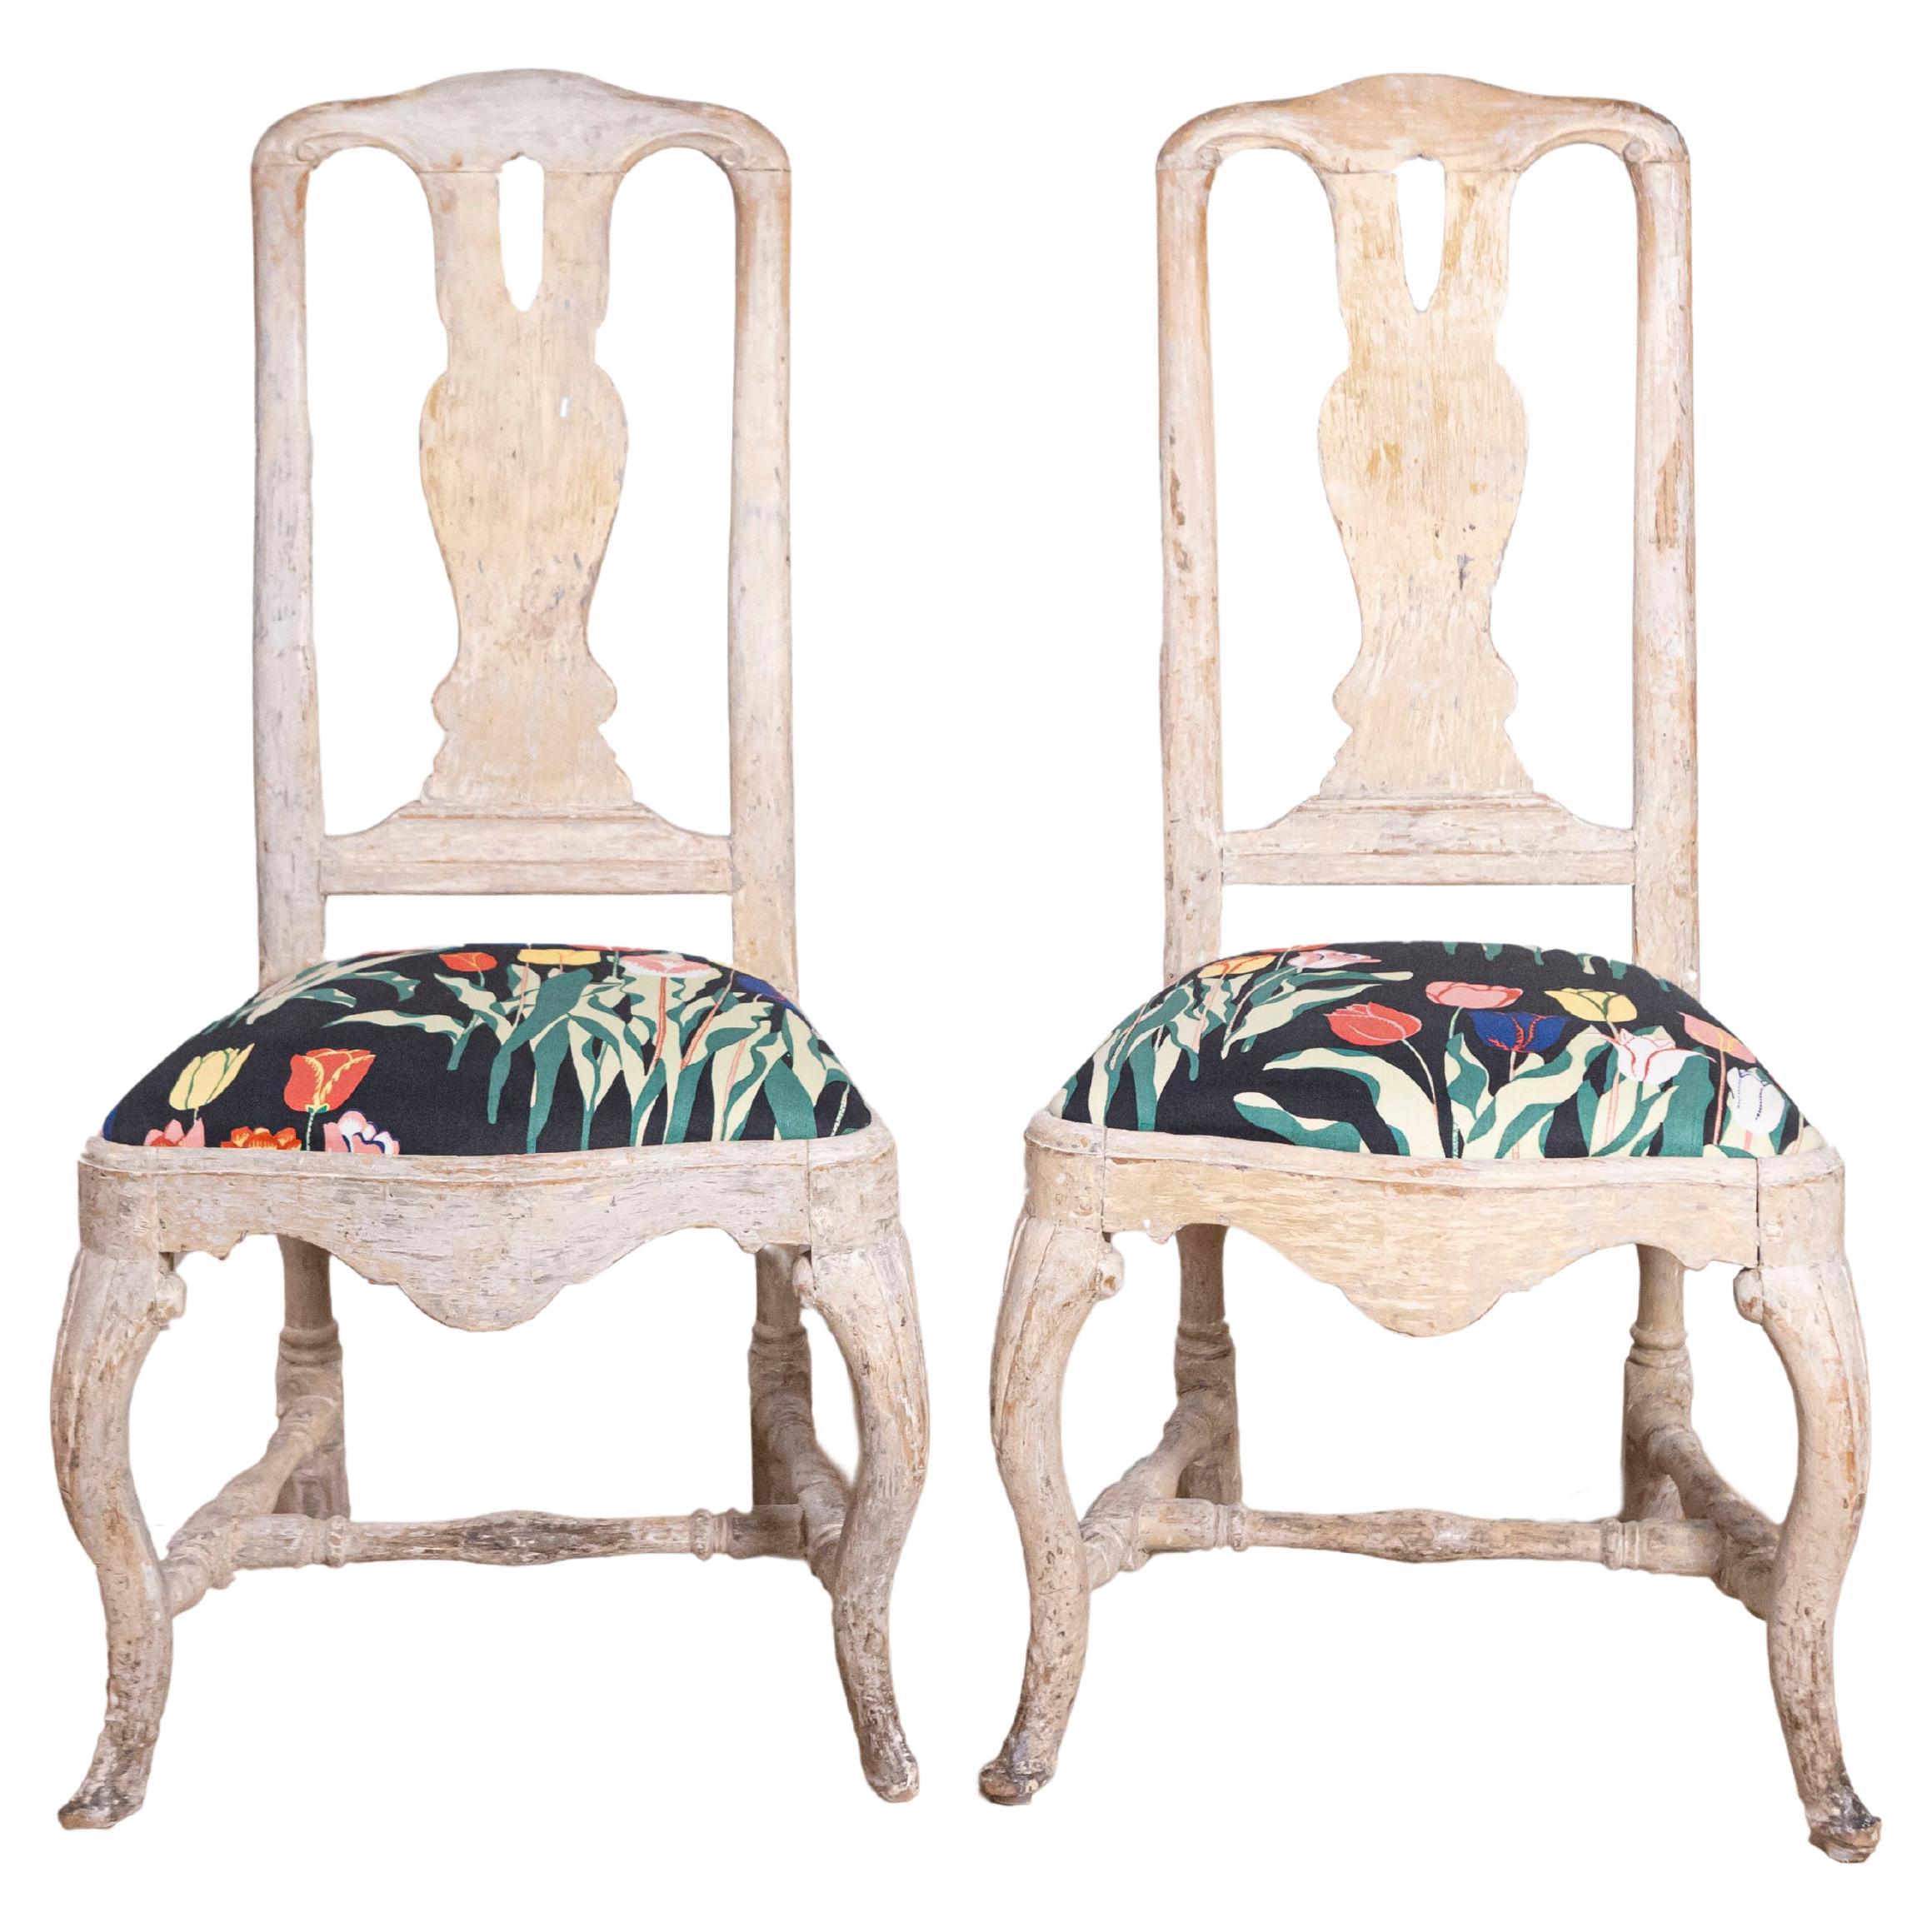 Pair of Swedish Rococo Period 18th Century Side Chairs with Carved Splats